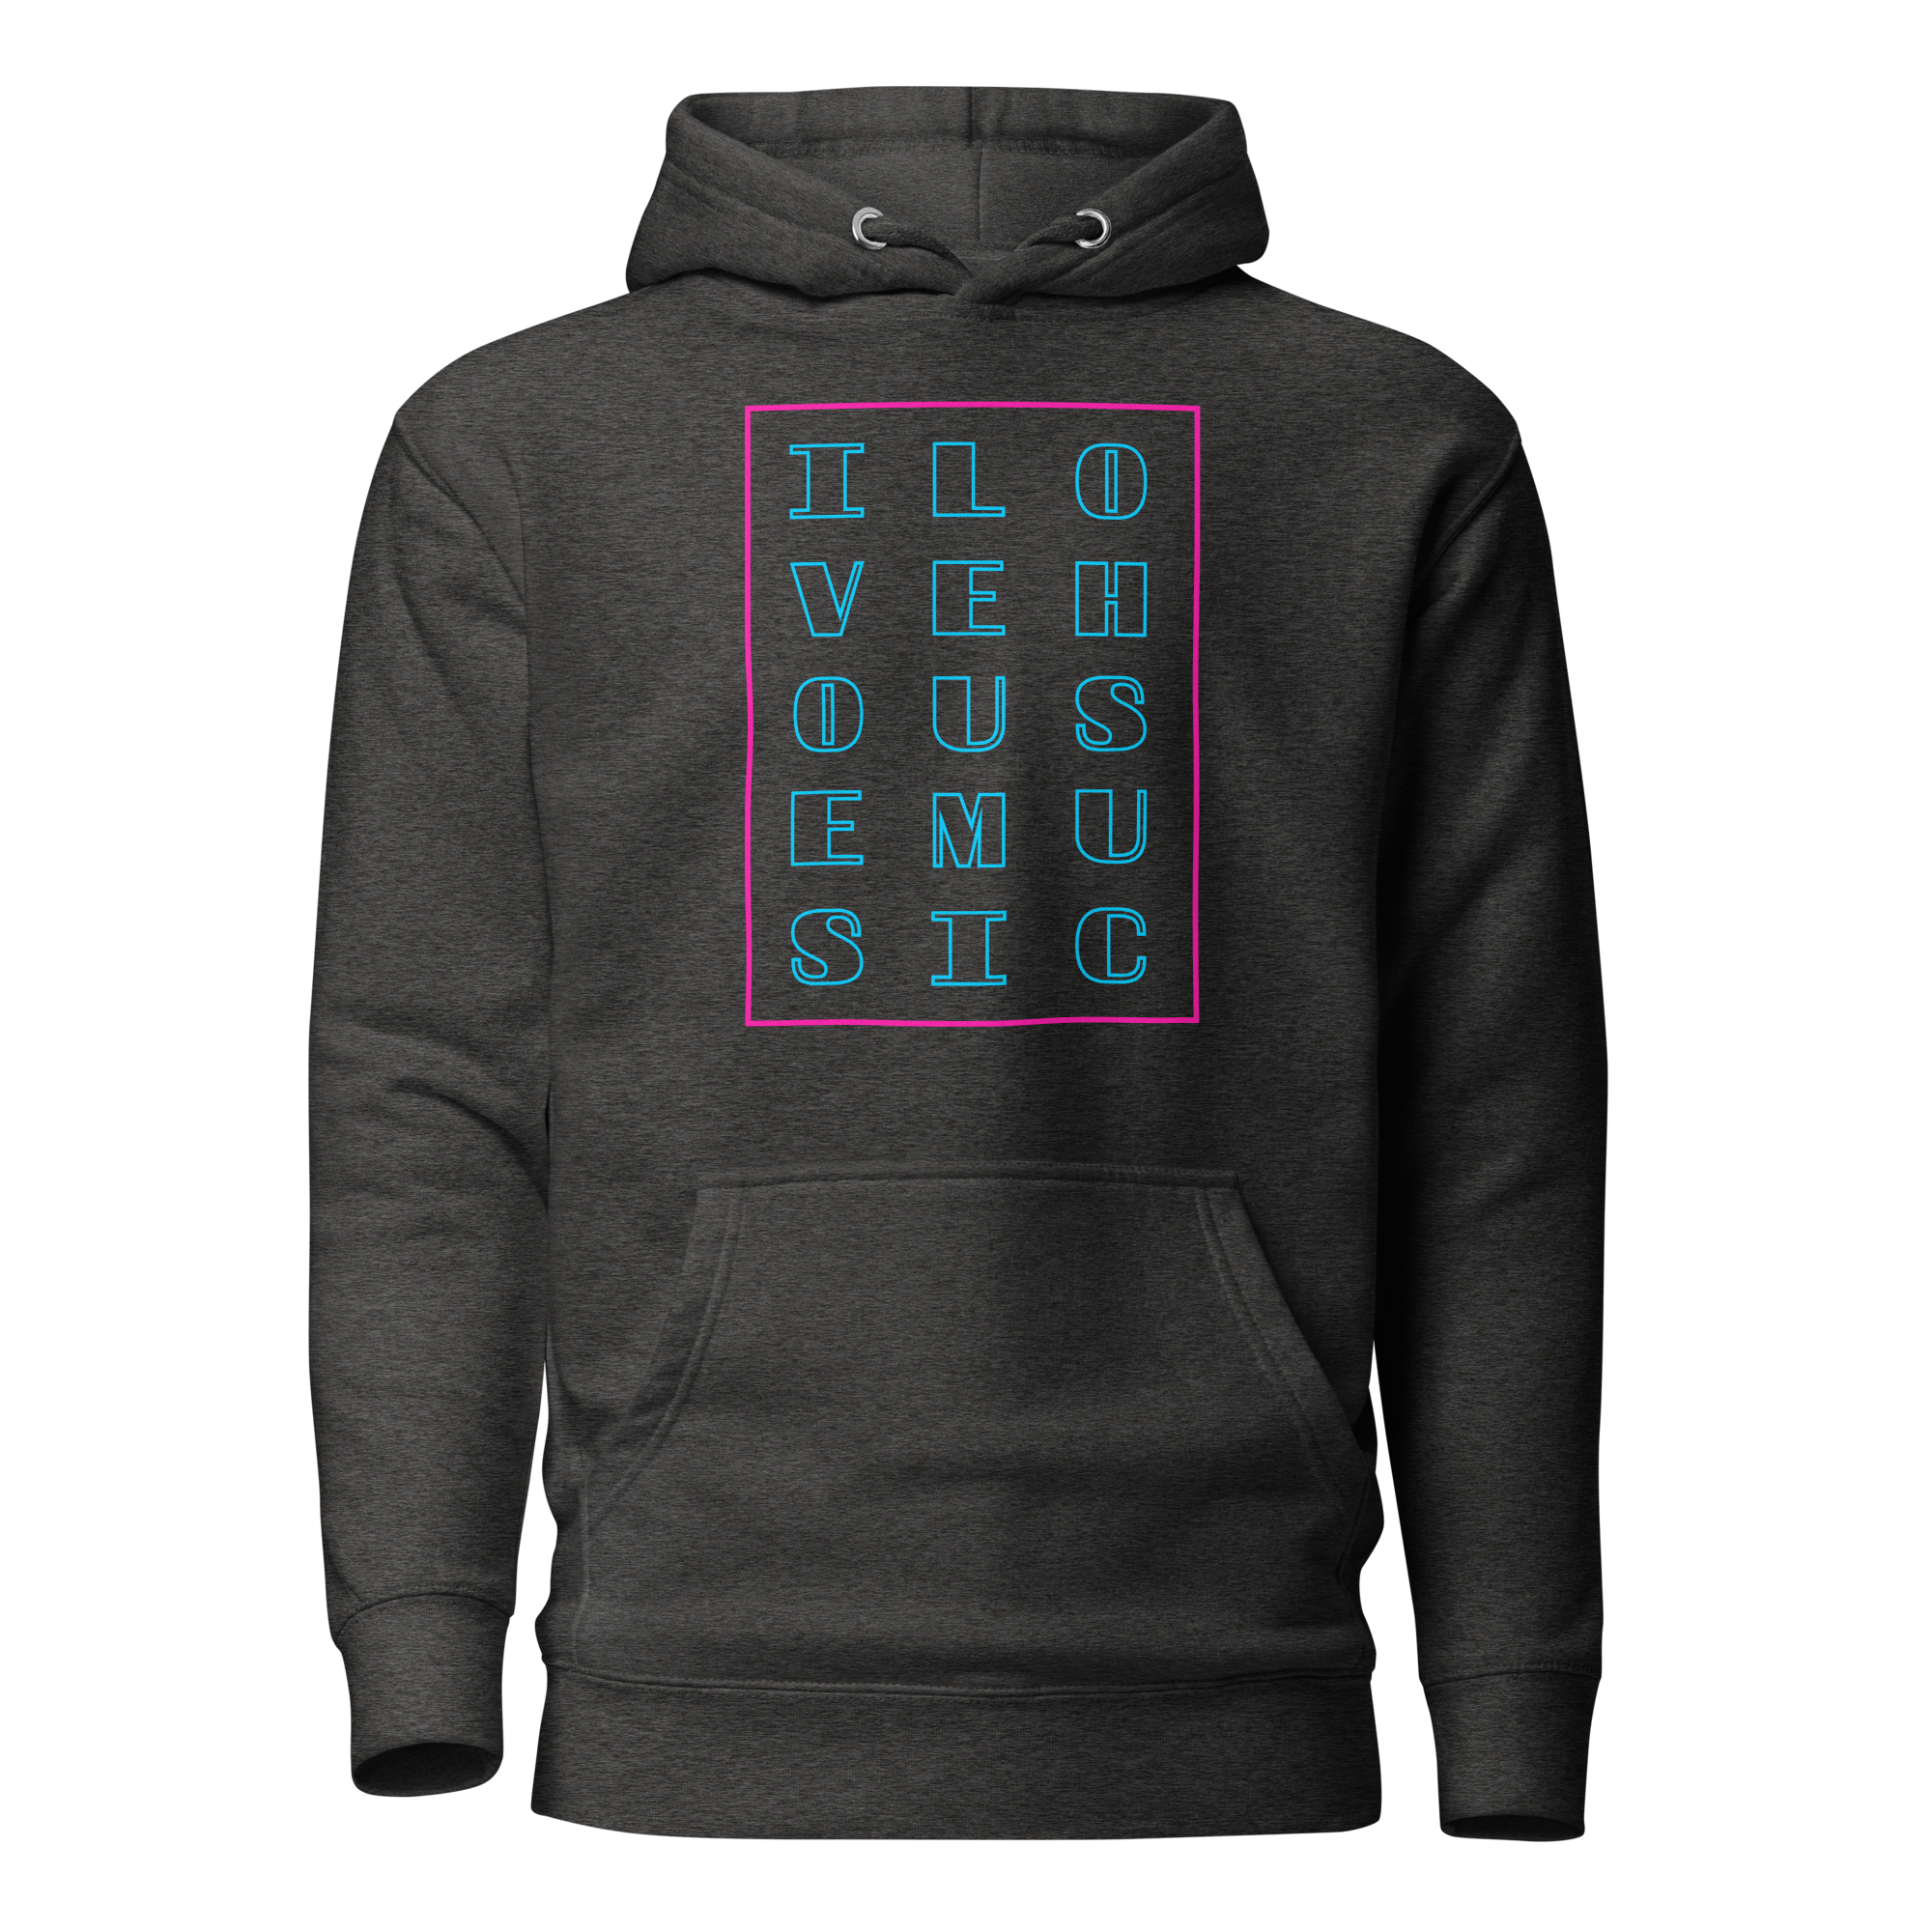 Charcoal Heather I Love House Music Graphic Hoodie Front View